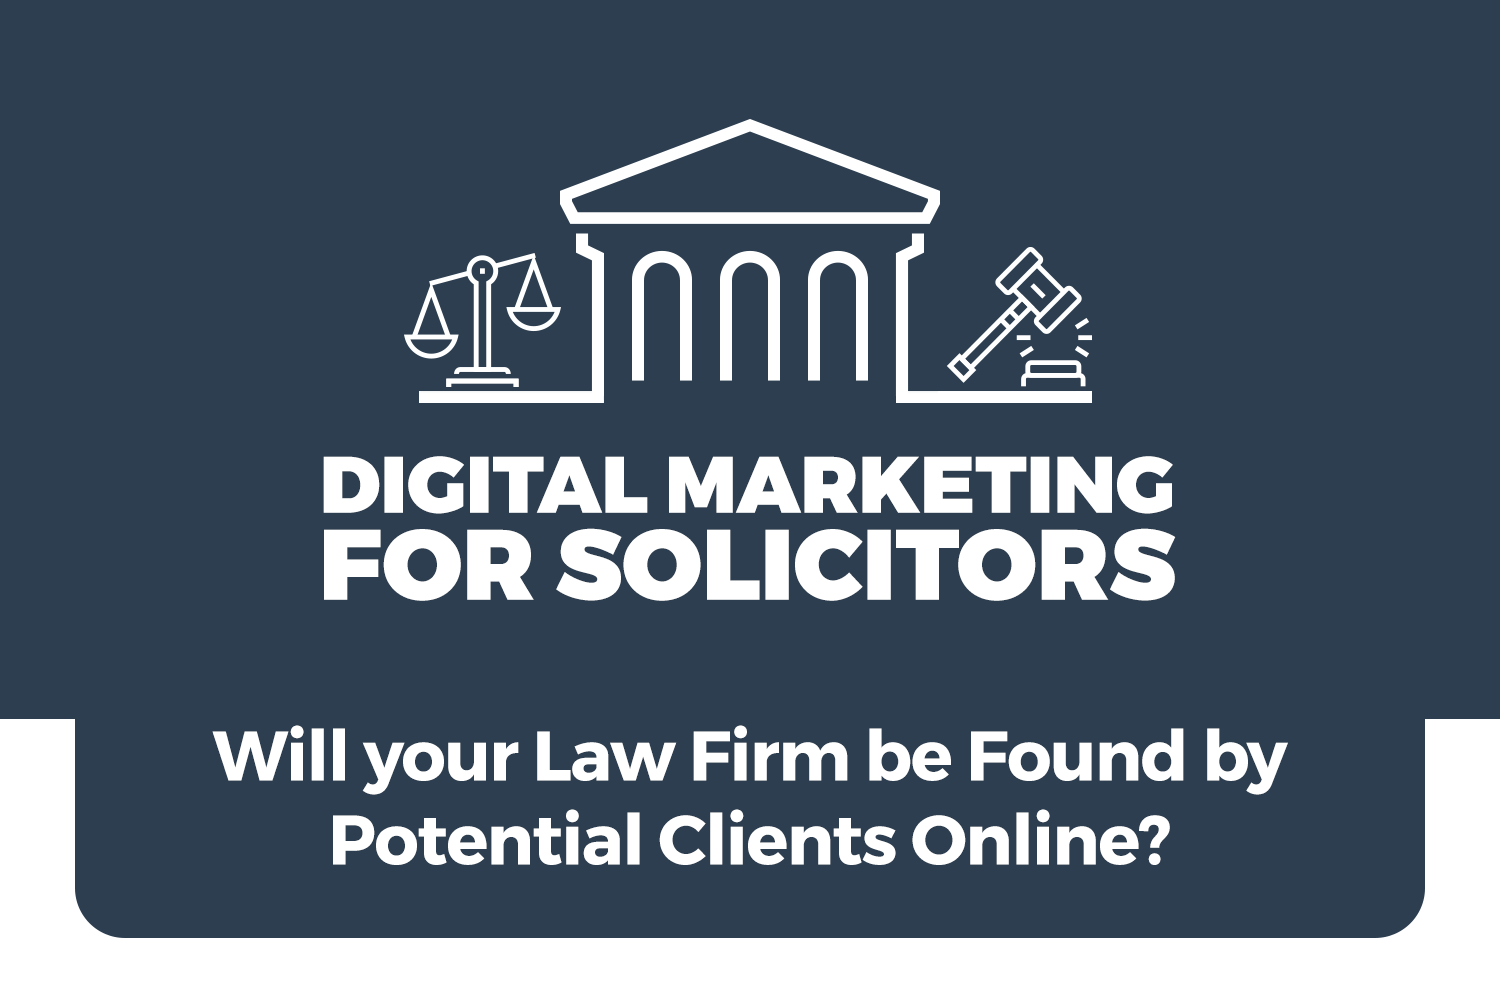 Marketing-to-Lawyers-2017-Infographic-Featured-Banner-Image.png